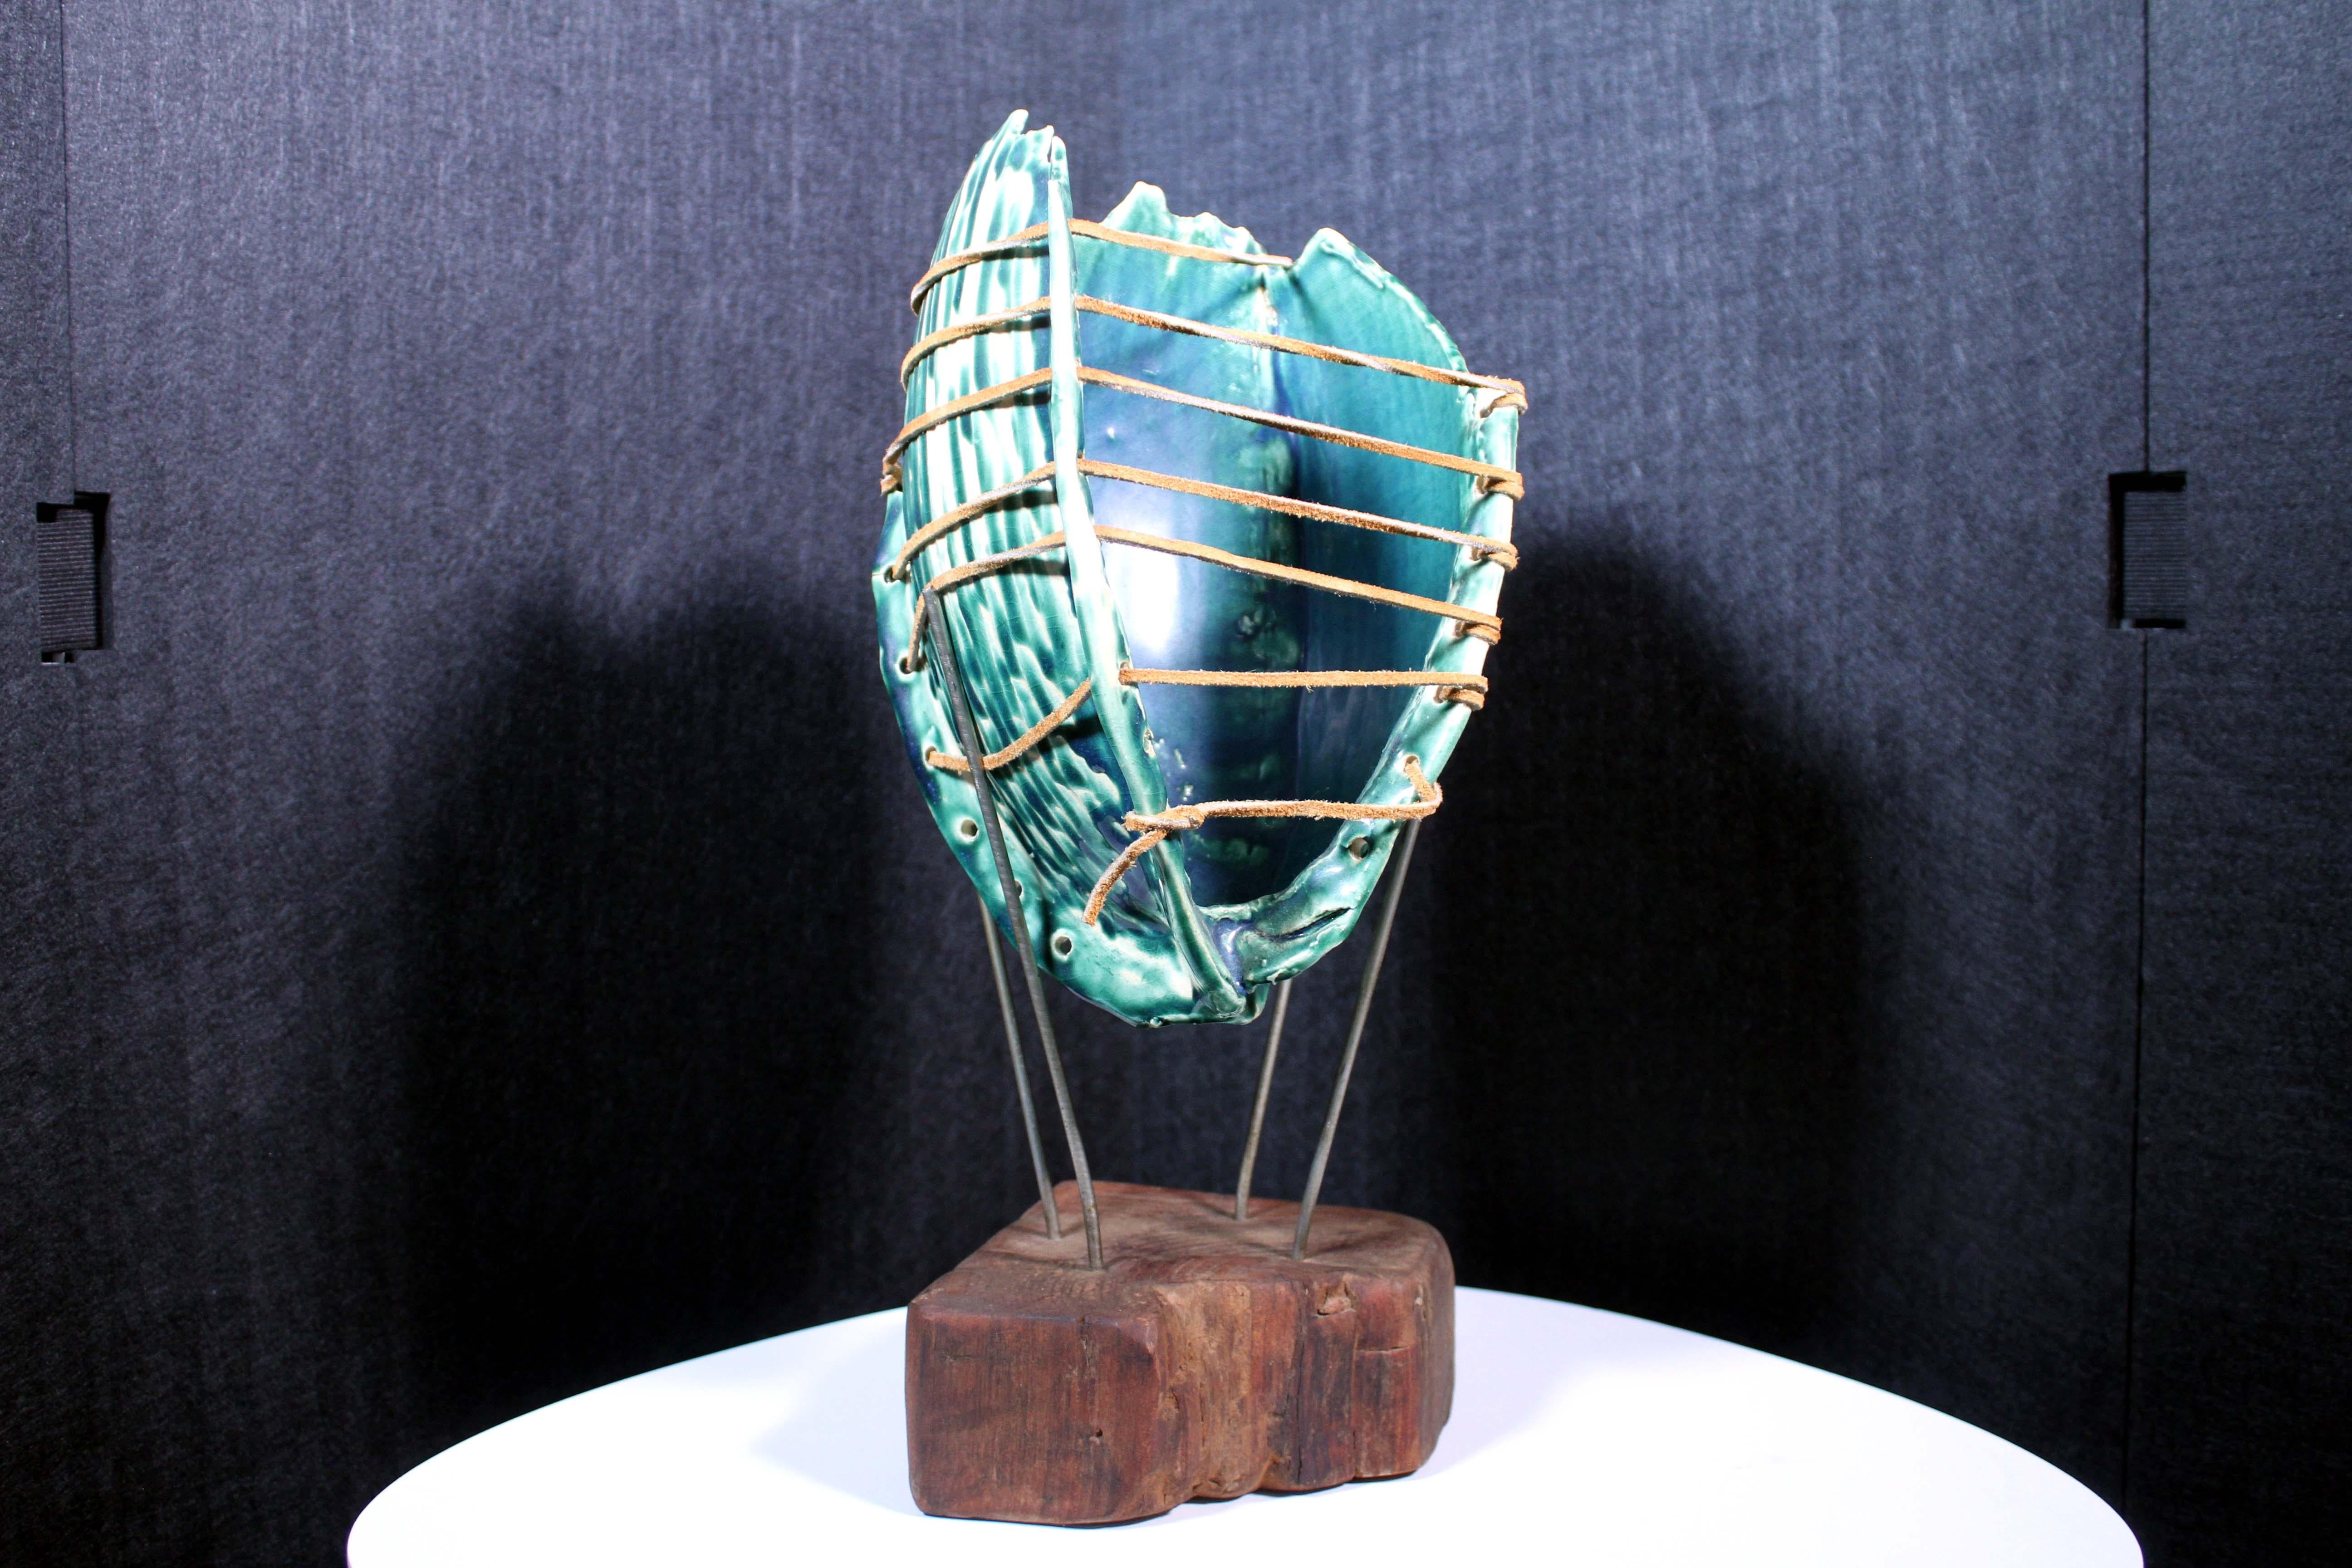 A unique Mid-Century Modern decorative ceramic item showcasing a biomorphic shell design. The sculpture has lovely tones of swirling green with leather strands. It sits upon a metal stand attached to an organic wood base. A marvelous statement and